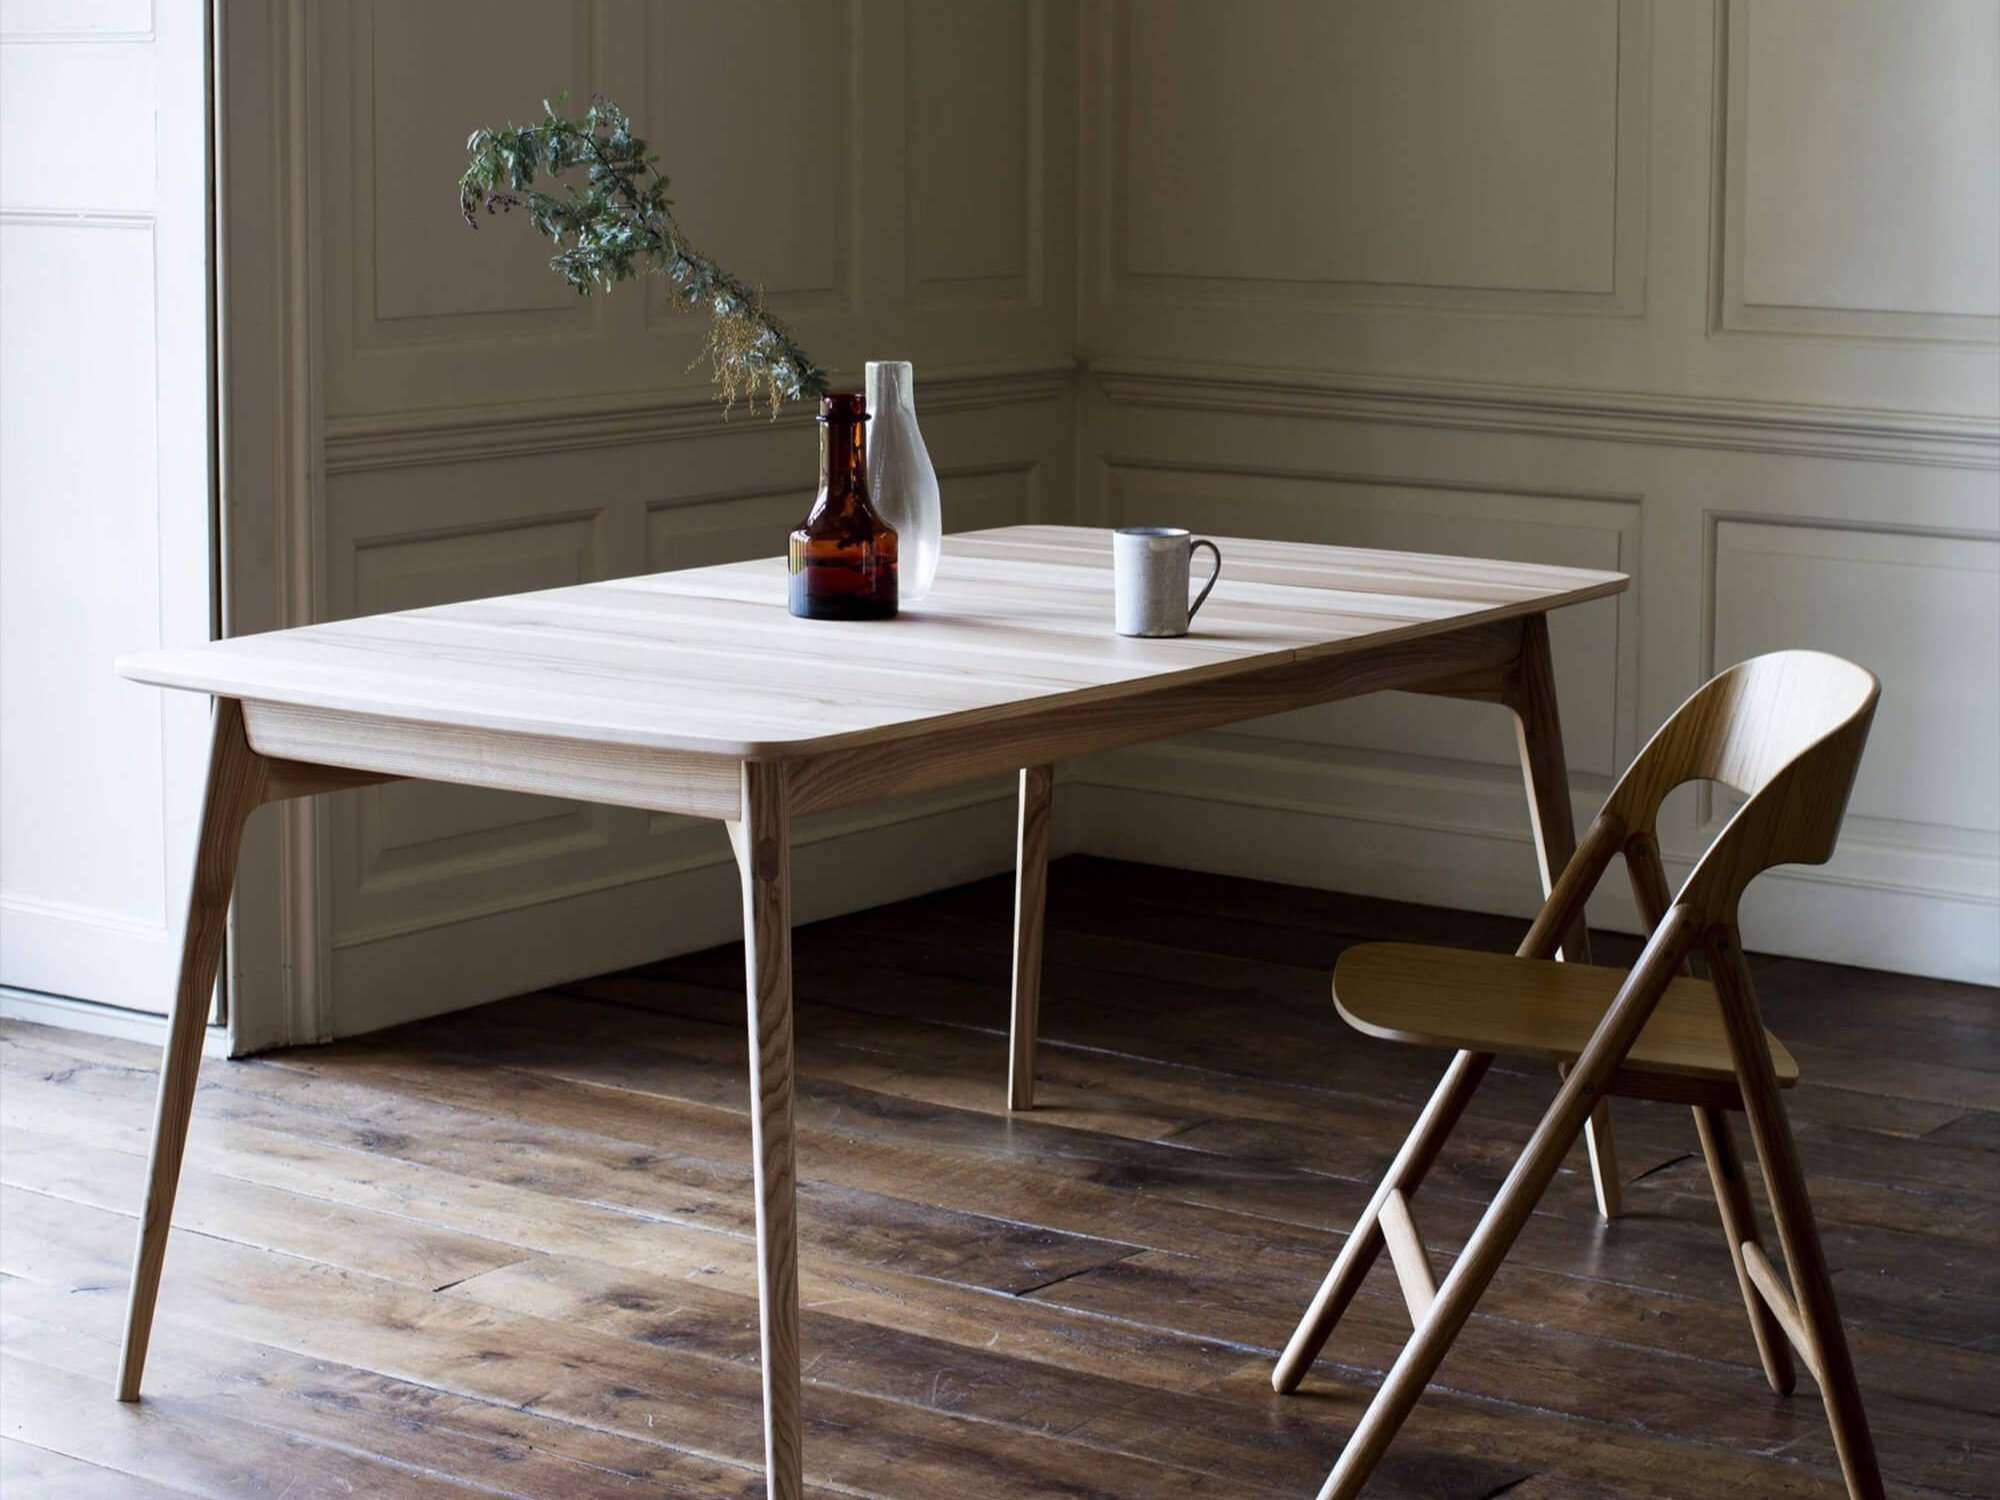 case-dulwich-dining-table.jpg